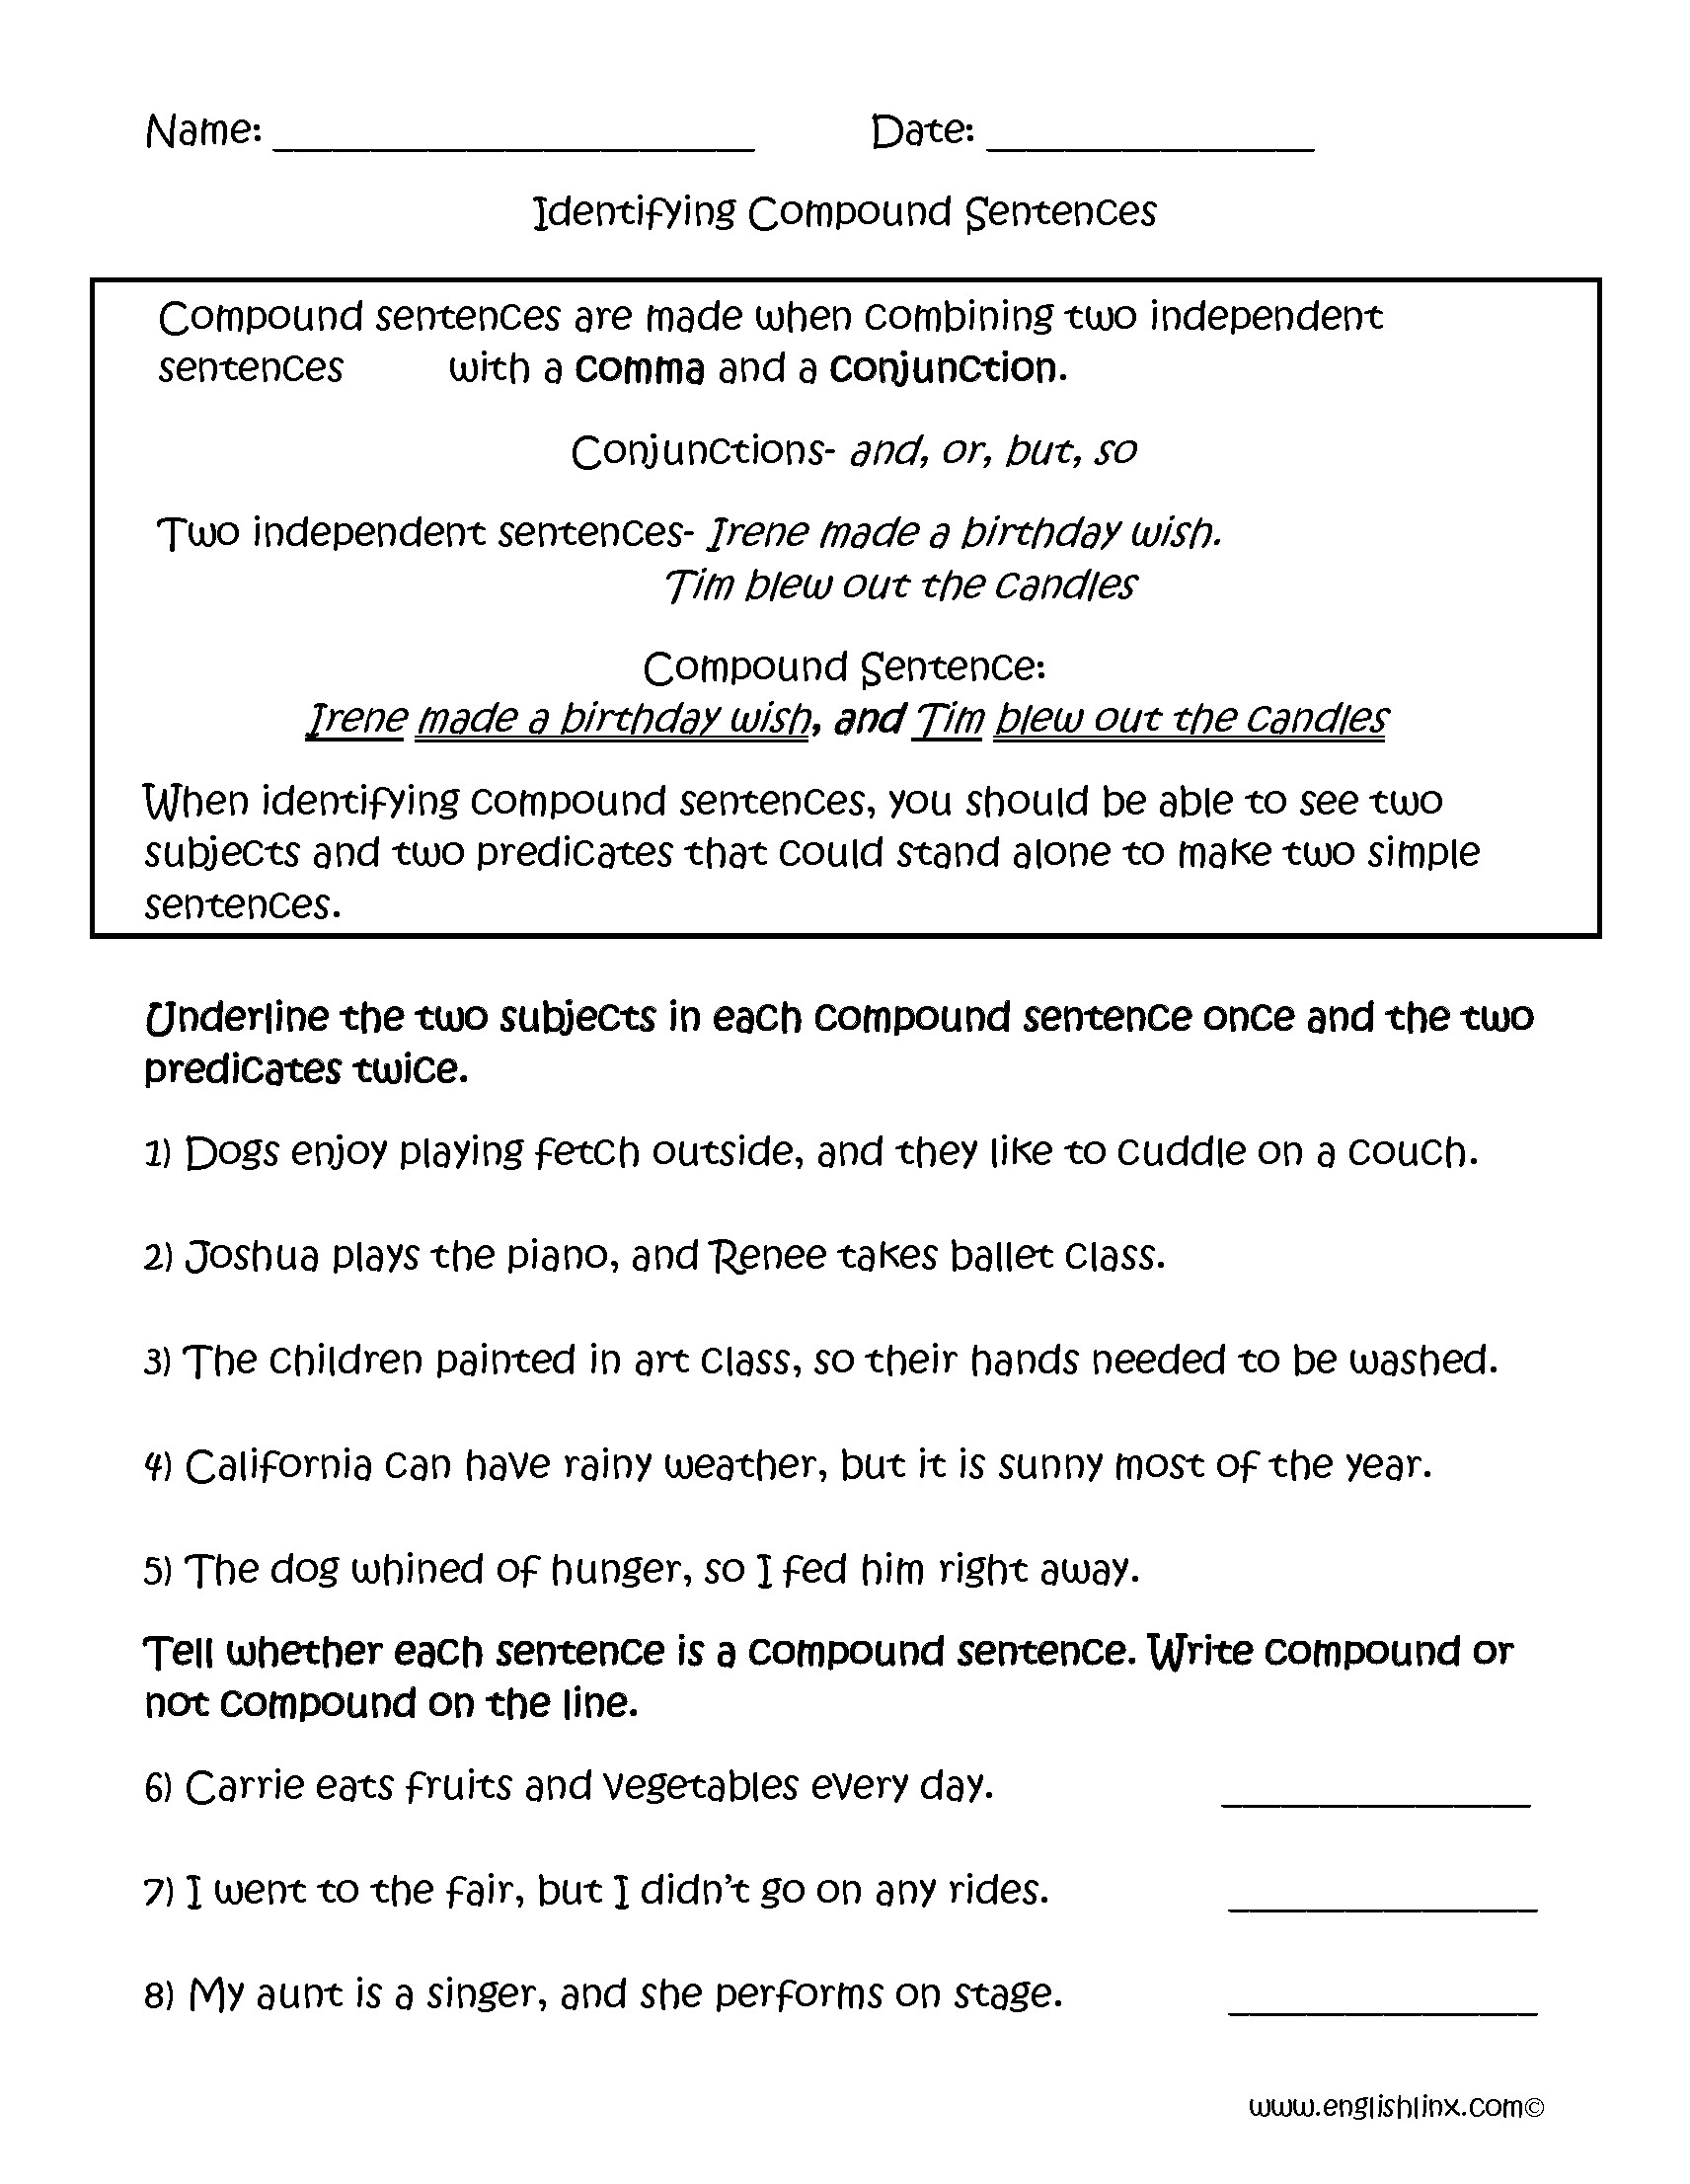 Worksheet On Identifying Simple Compound And Complex Sentences